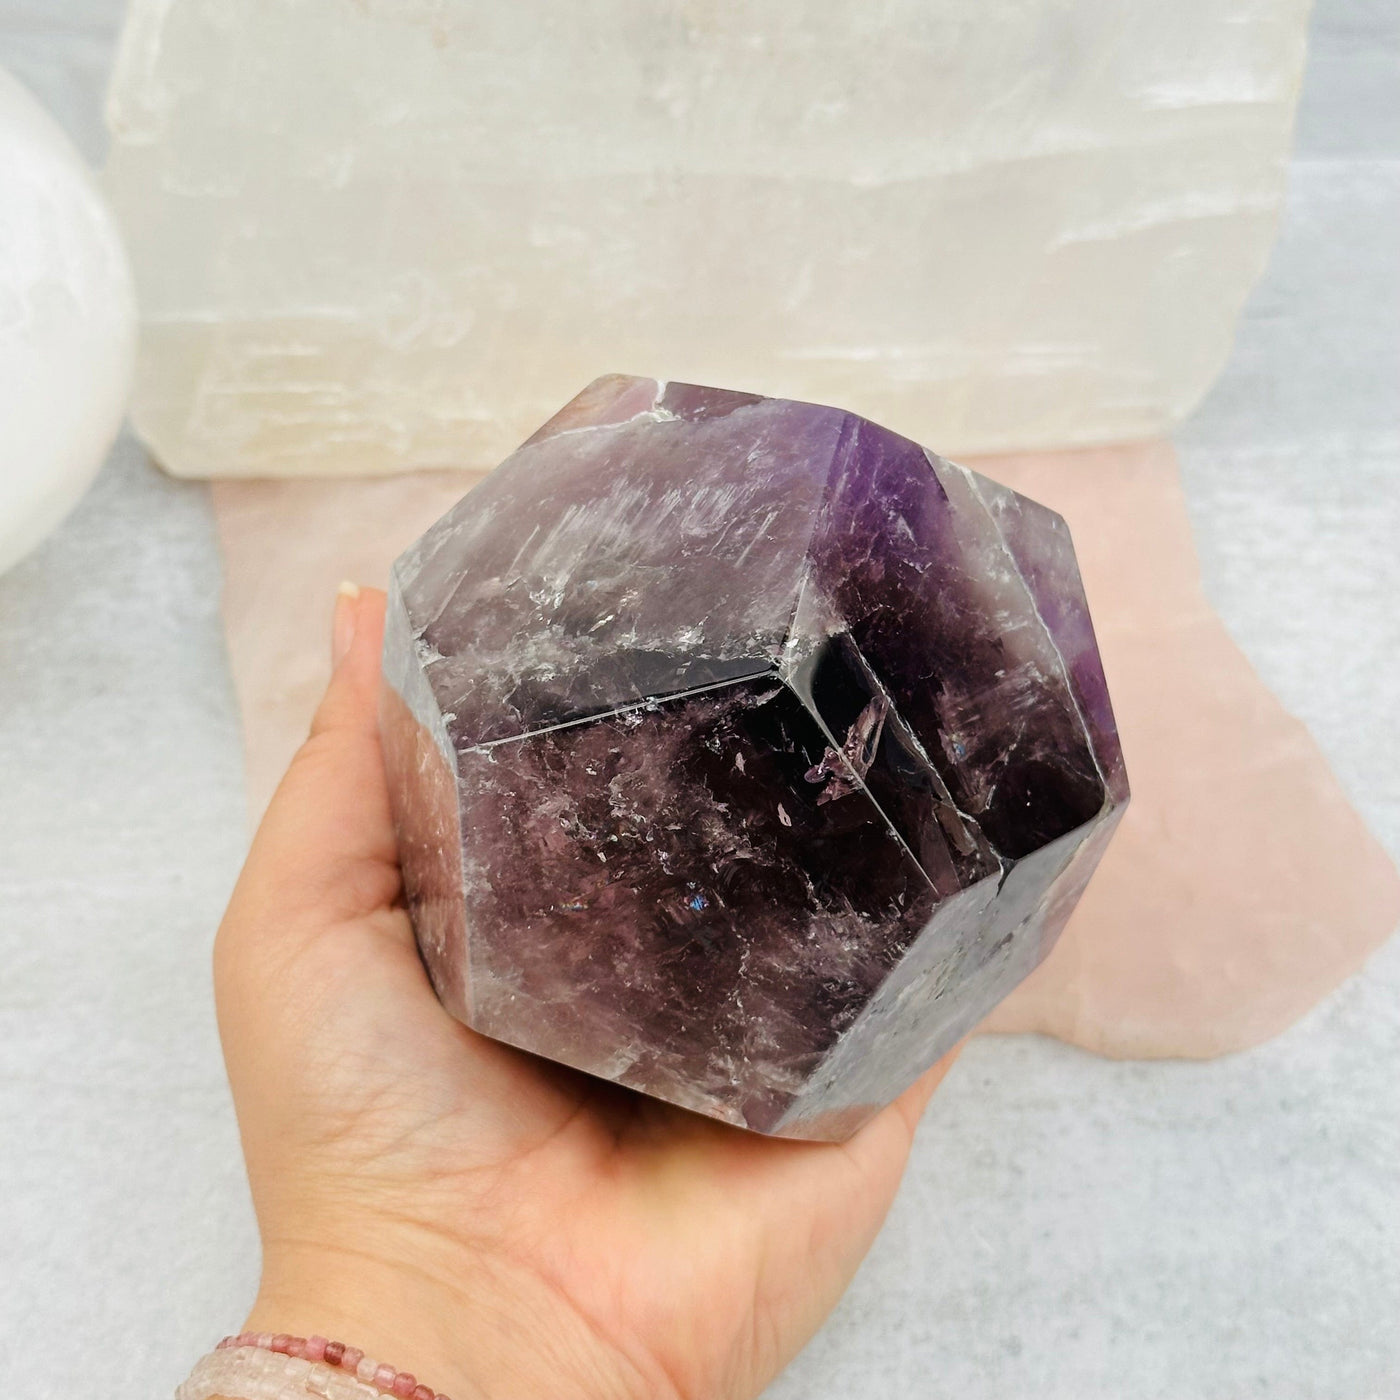 Amethyst Crystal Dodecahedron in hand for size reference 